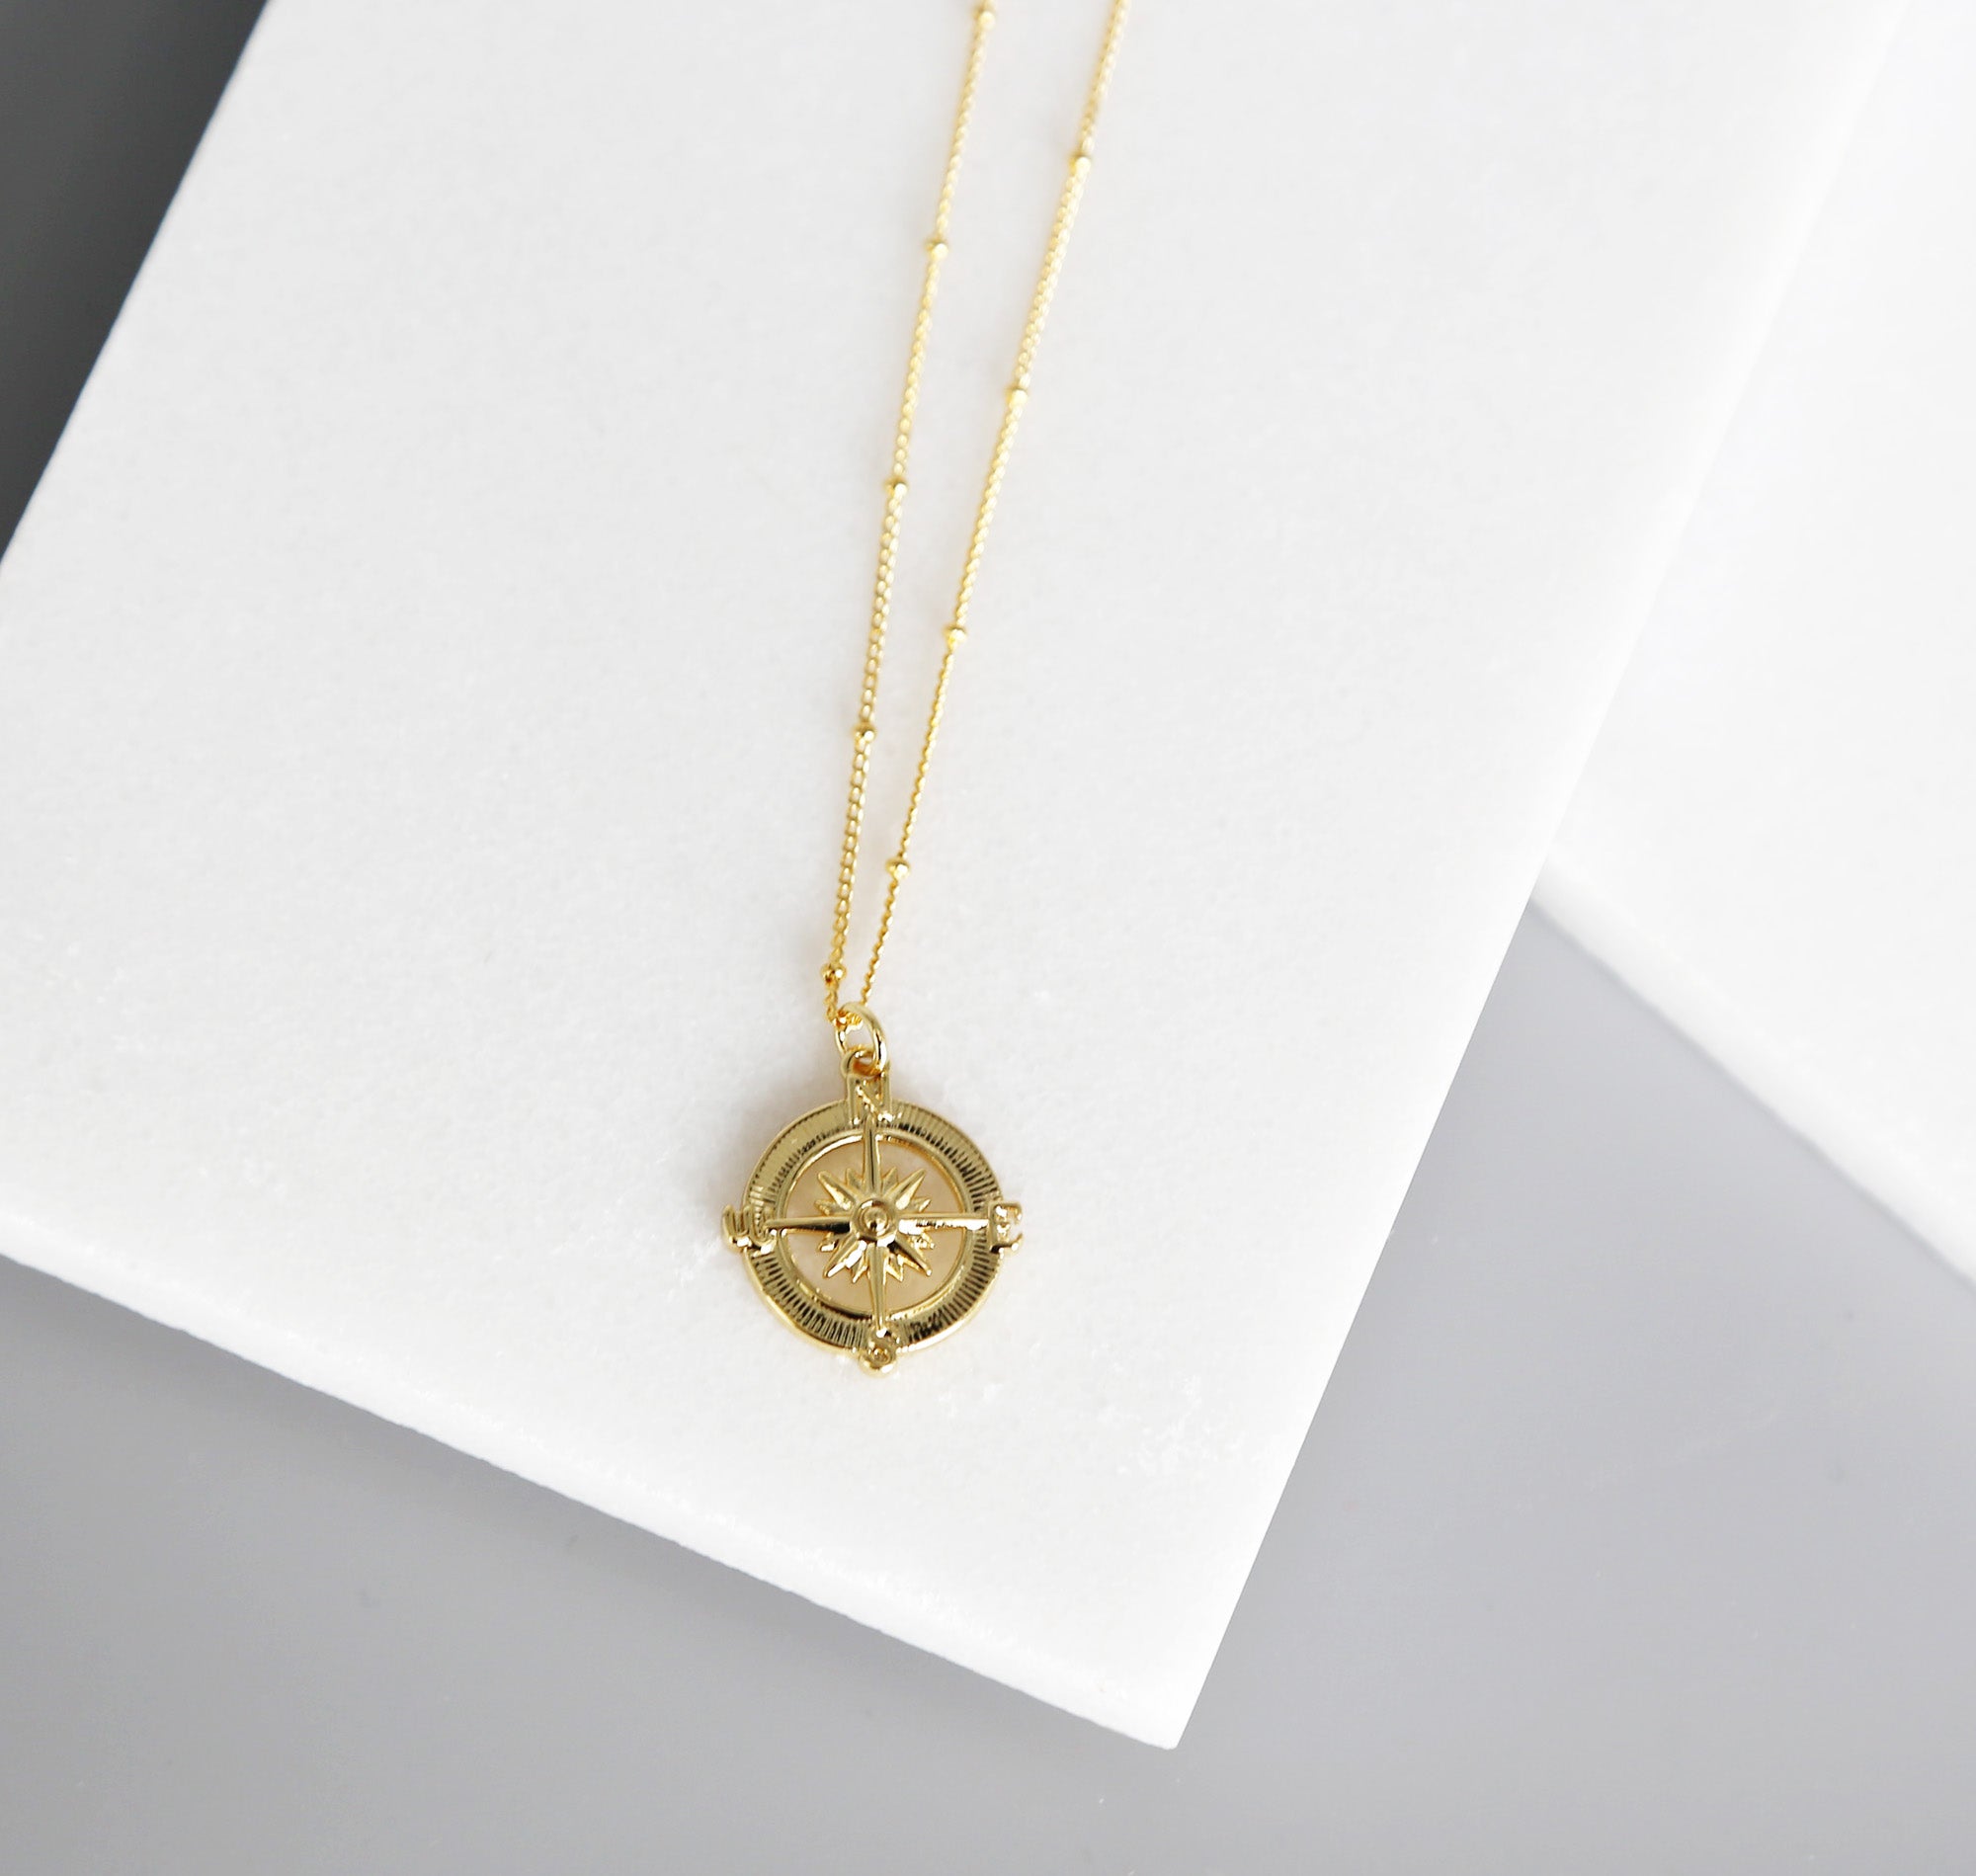 Over & Over Gold North Star Compass Necklace Argento.com